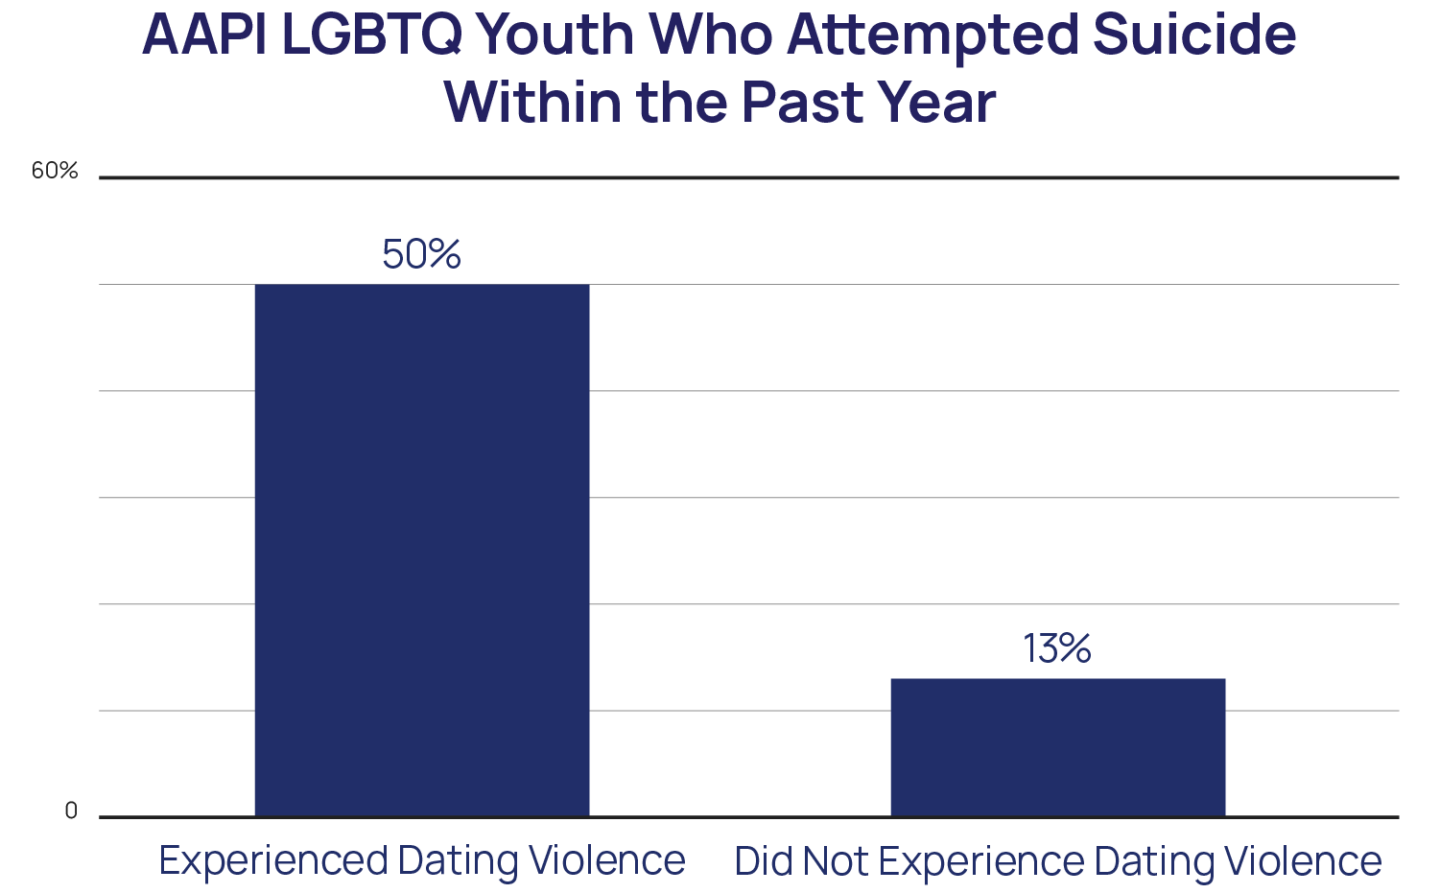 AAPI LGBTQ Youth who attempted suicide within the past year who experienced dating violence bar chart